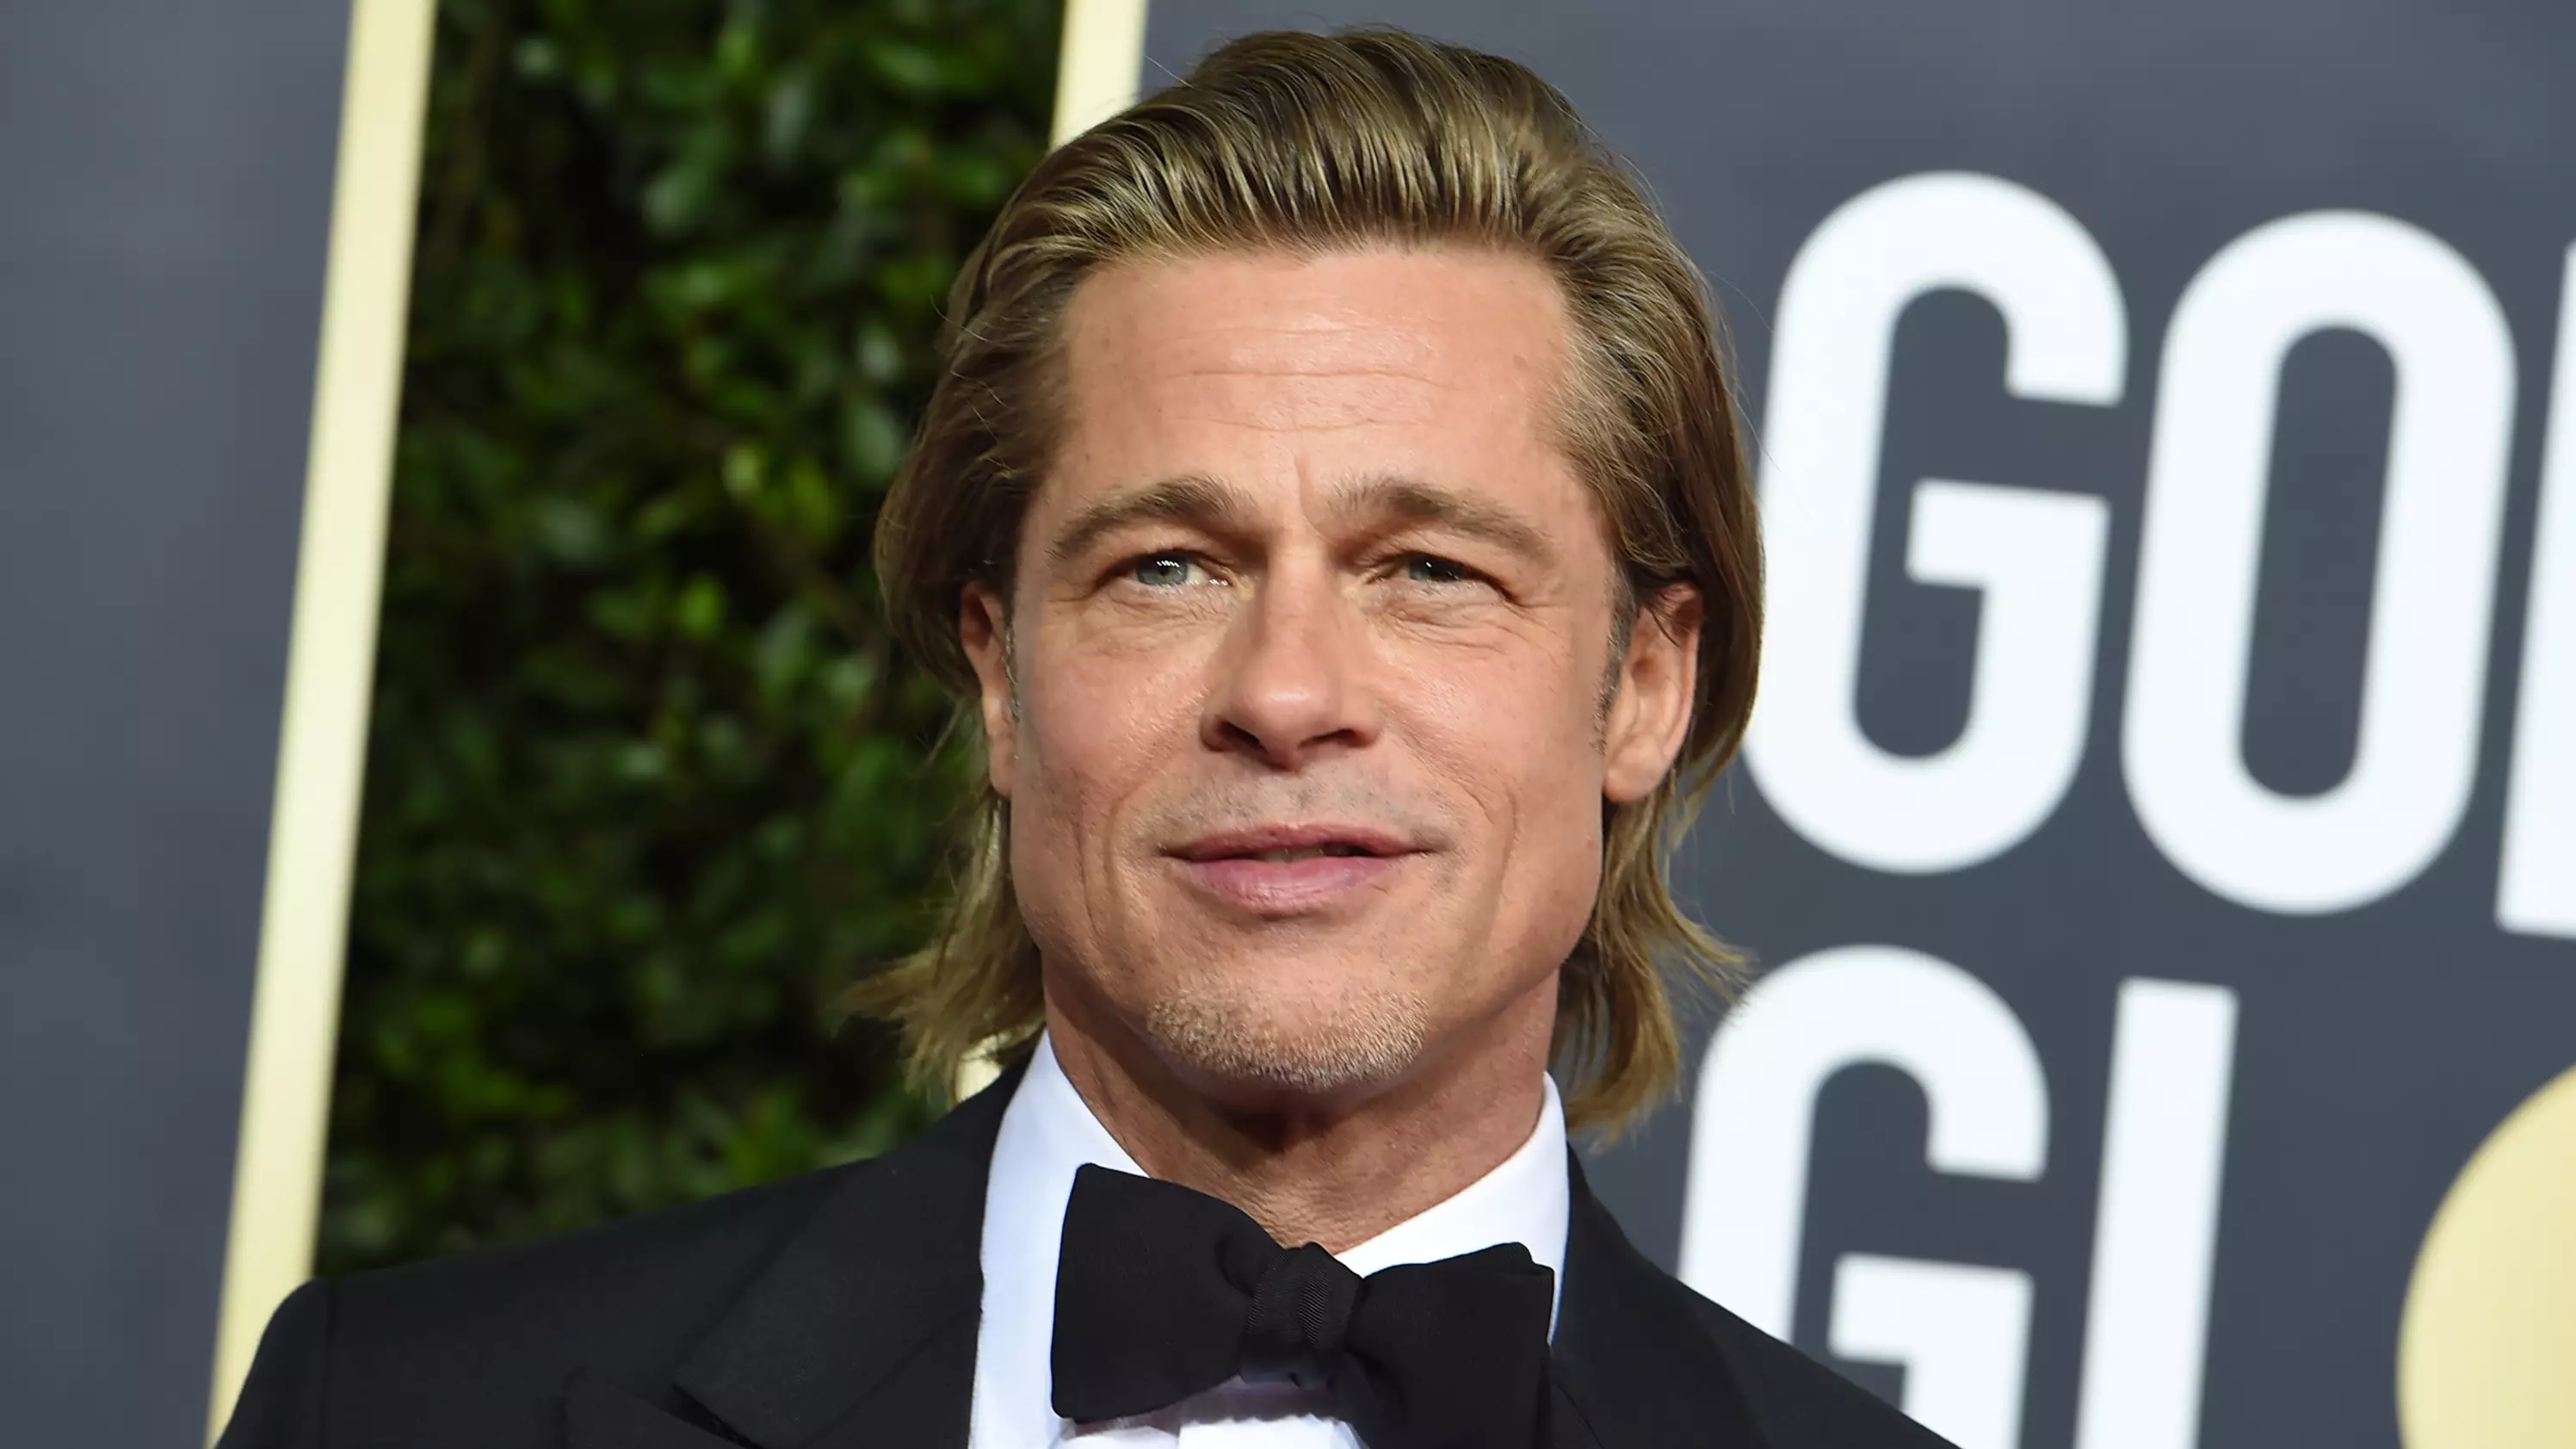 Brad Pitt Wins Best Supporting Actor For Once Upon A Time In Hollywood